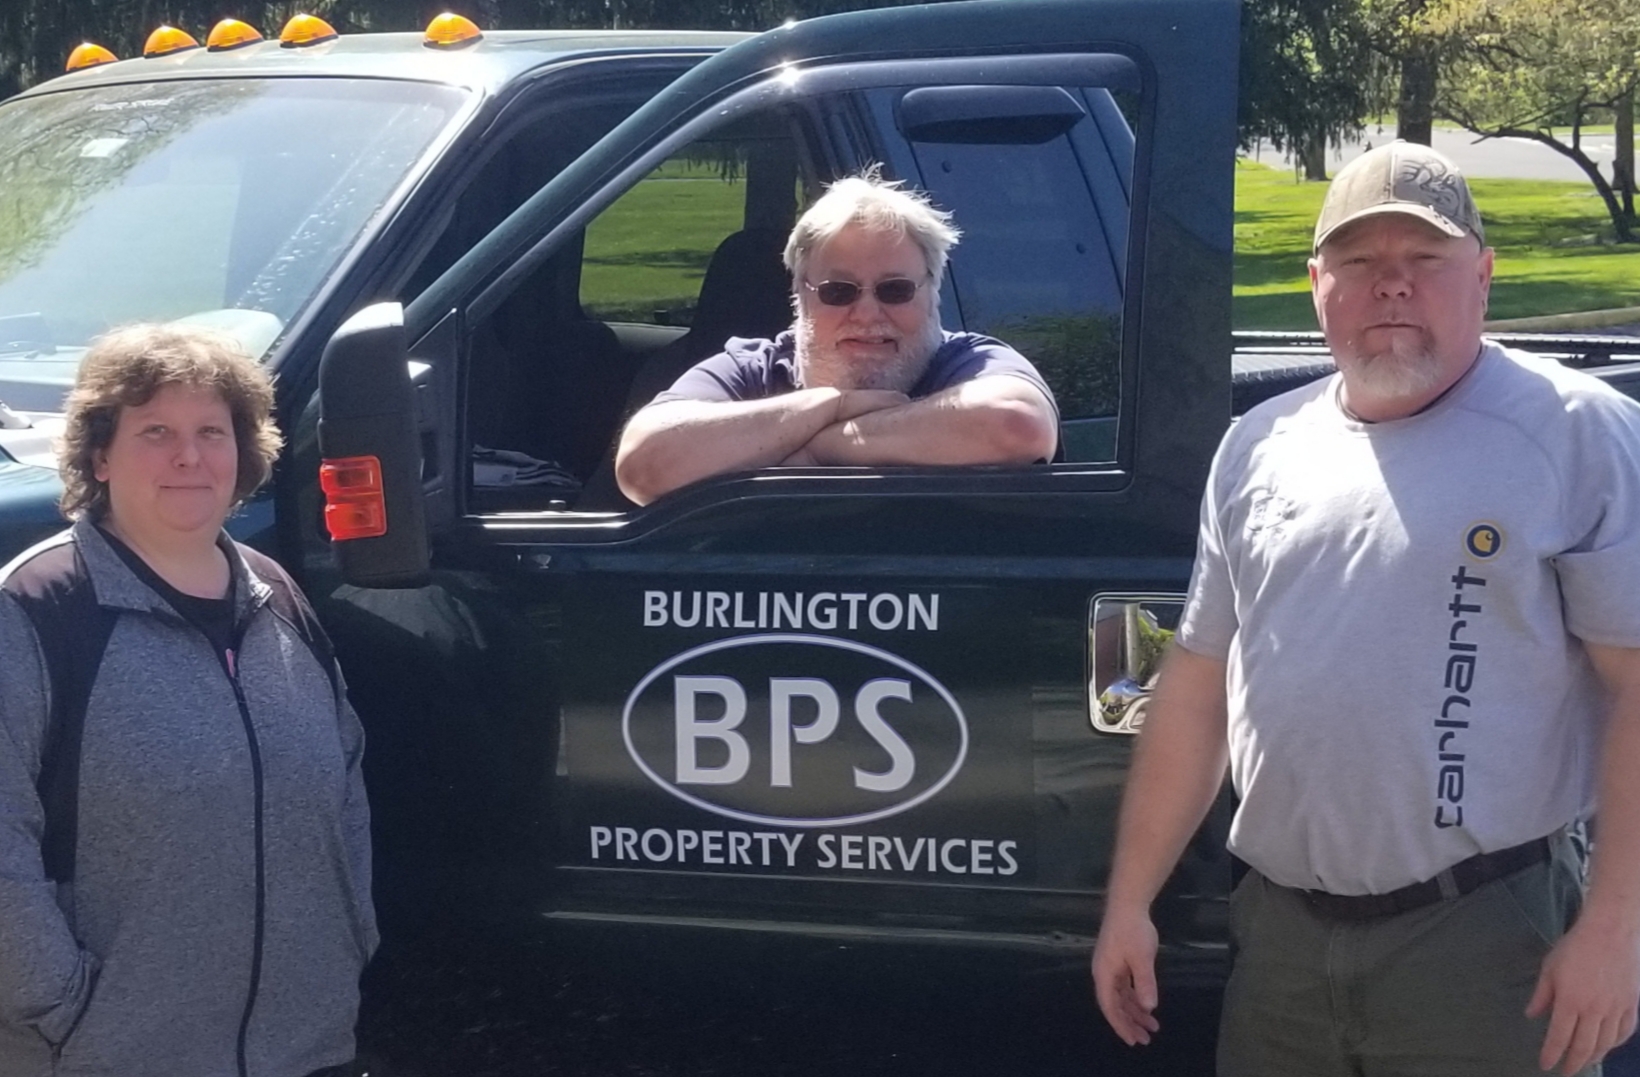 Management Team by a BPS truck